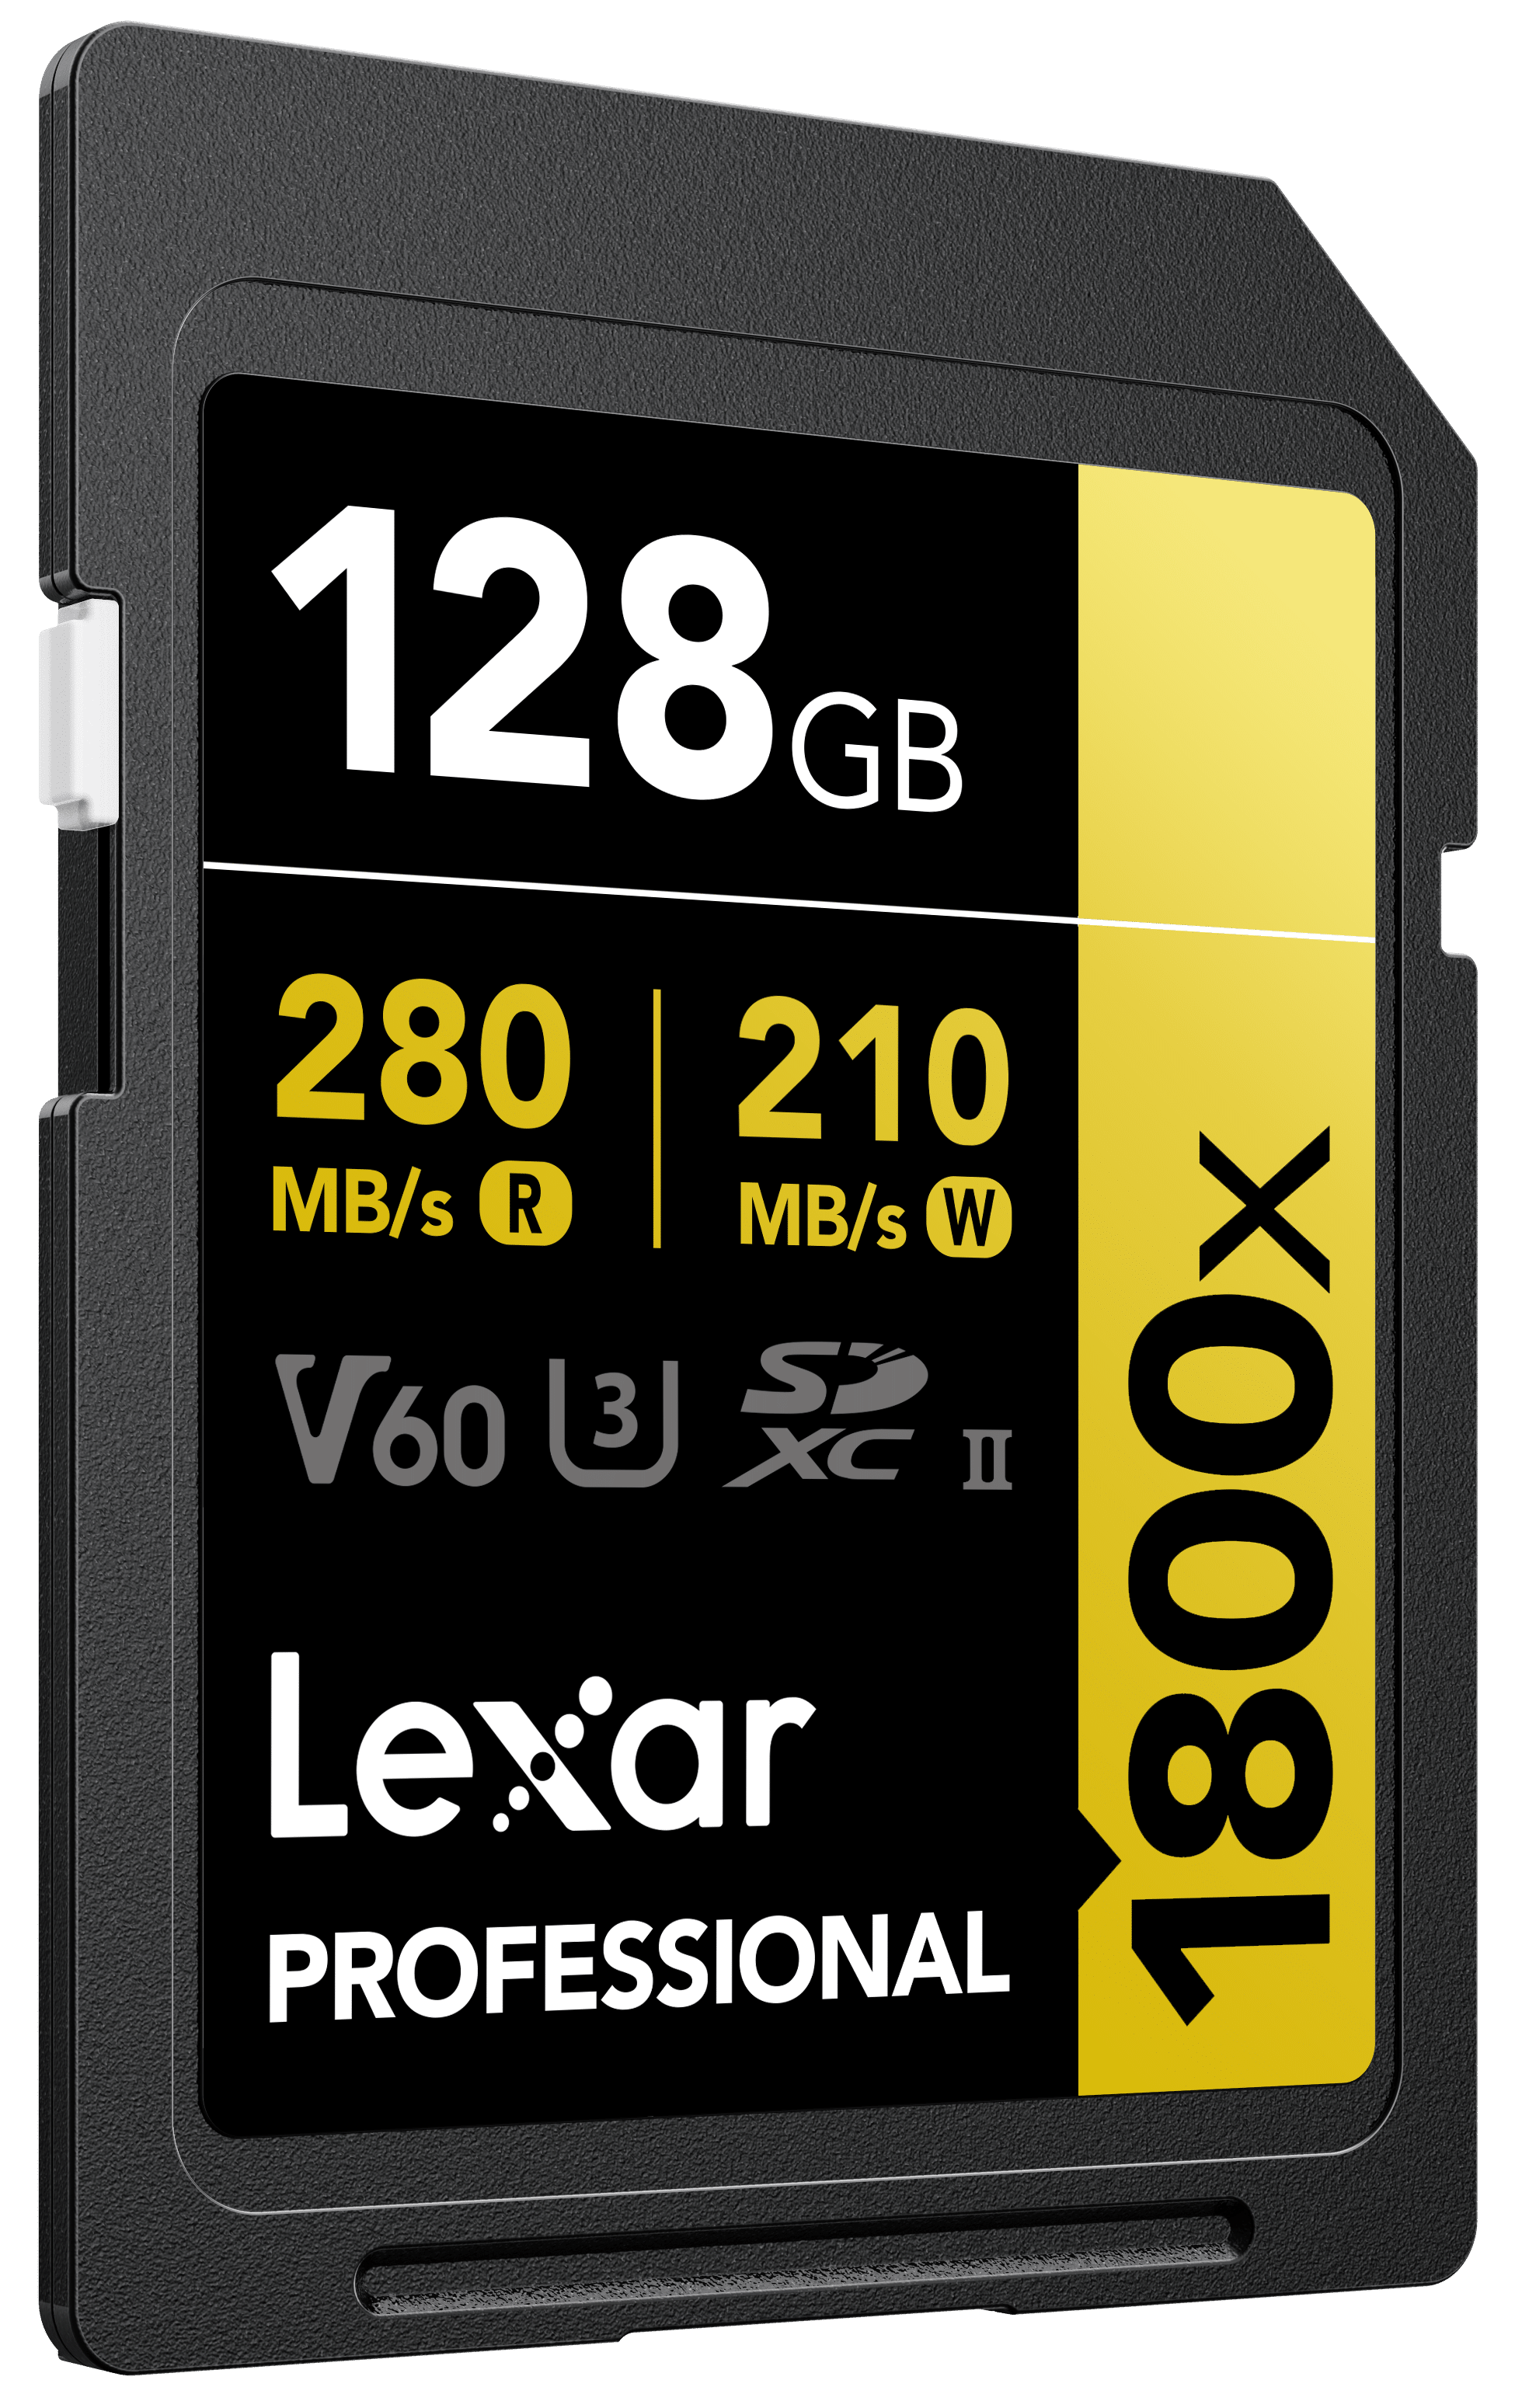 Next-Generation Flash Memory Card Series Launched In India